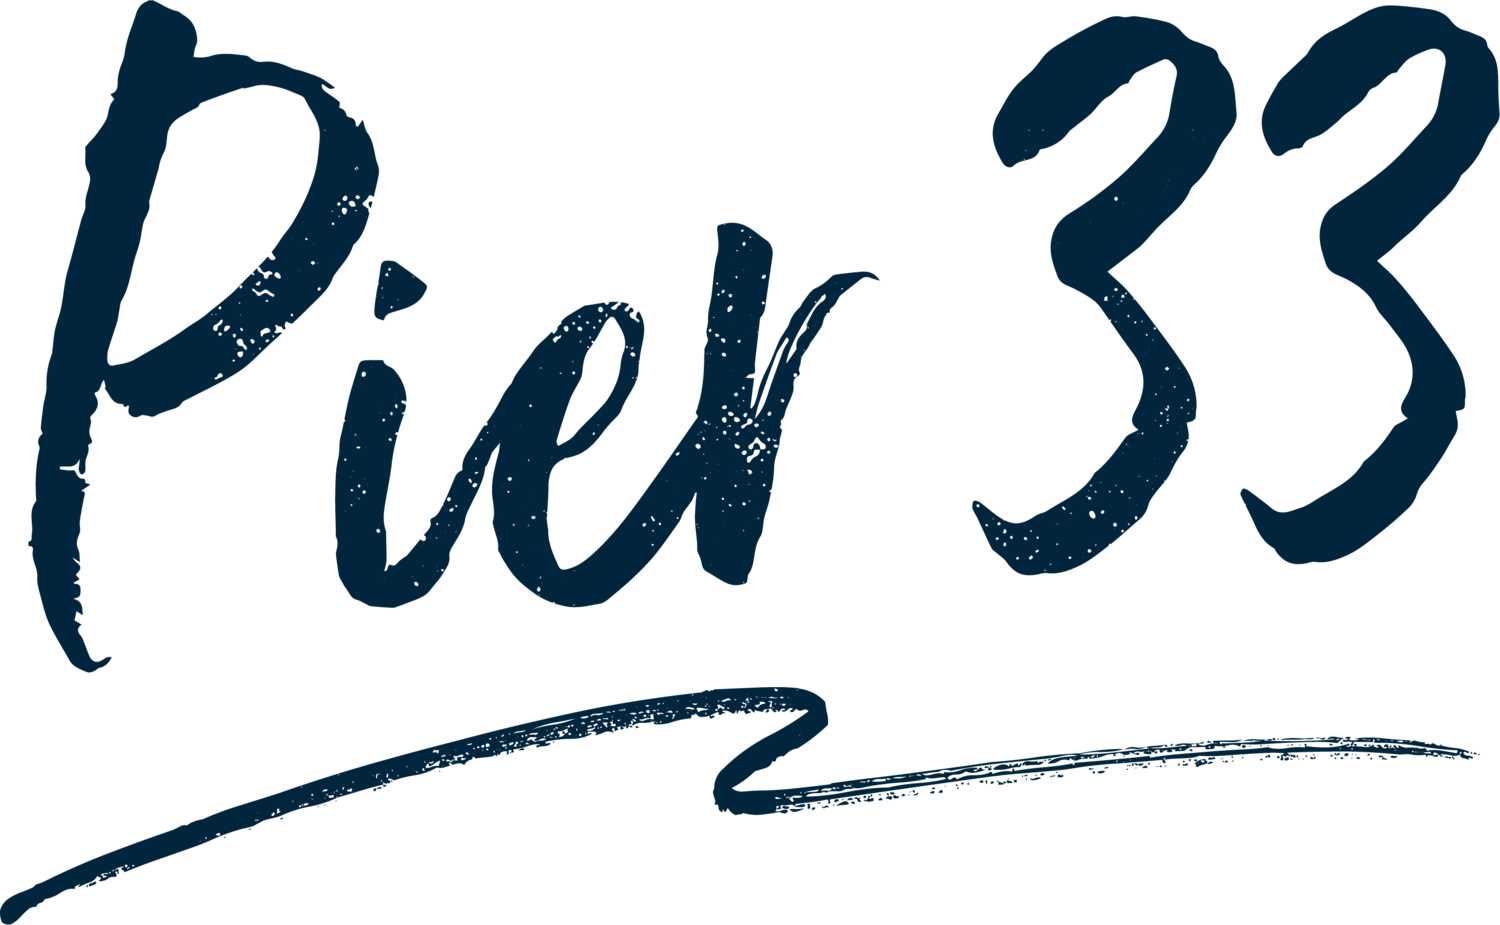 Pier 33 Mooloolaba | Waterfront Restaurant Bar and Events